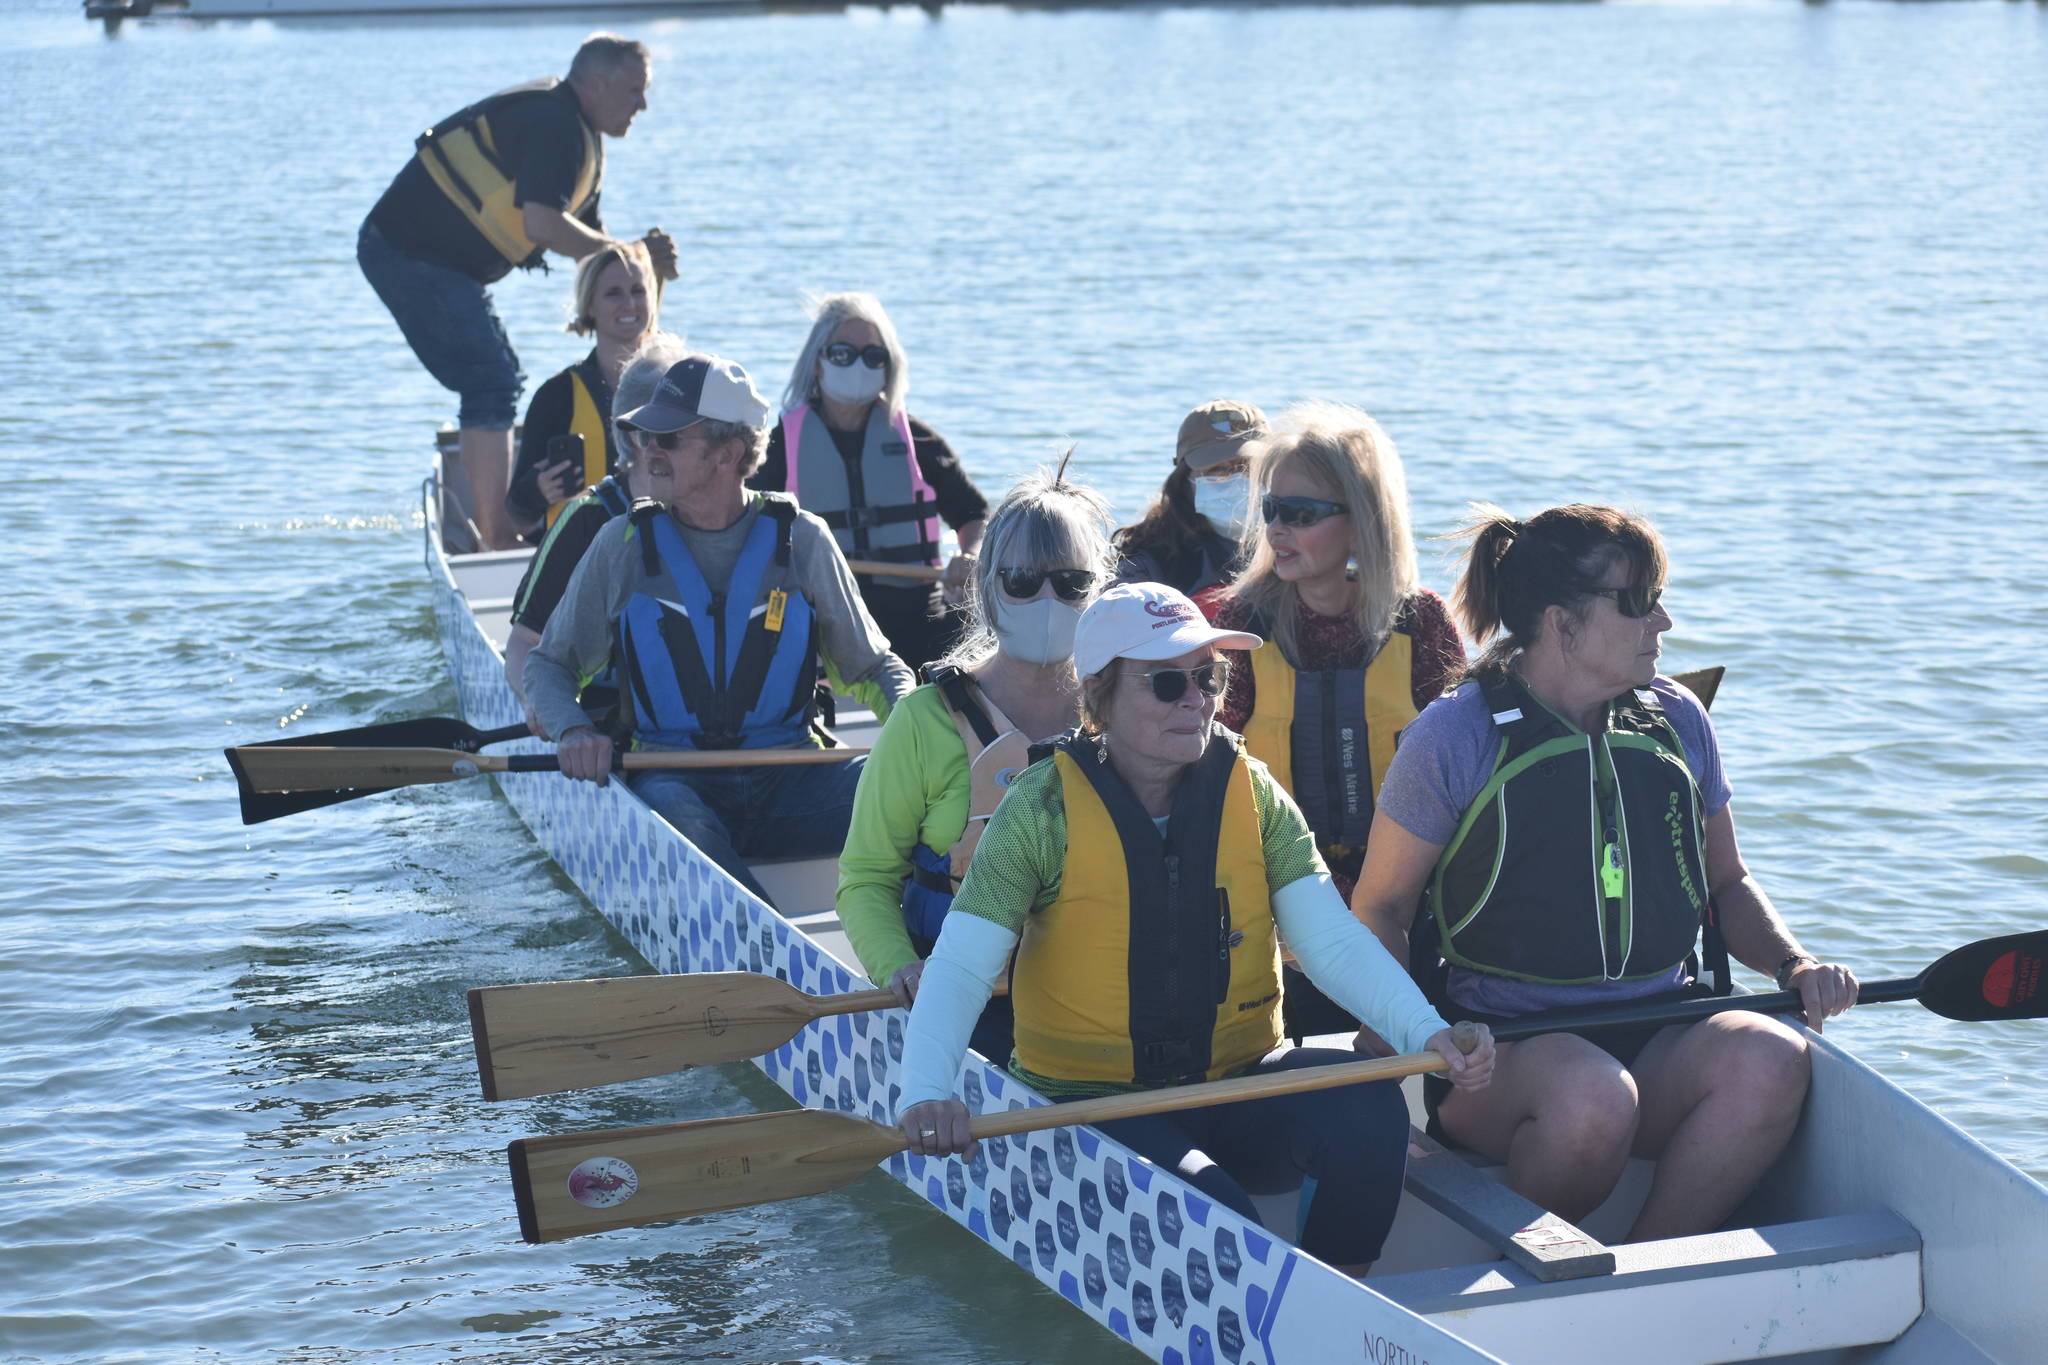 Photo by Emily Gilbert/Whidbey News-Times
Members of the North Puget Sound Dragon Boat Club launched their 40-foot-long dragon boat at Oak Harbor Marina for the season on Wednesday.